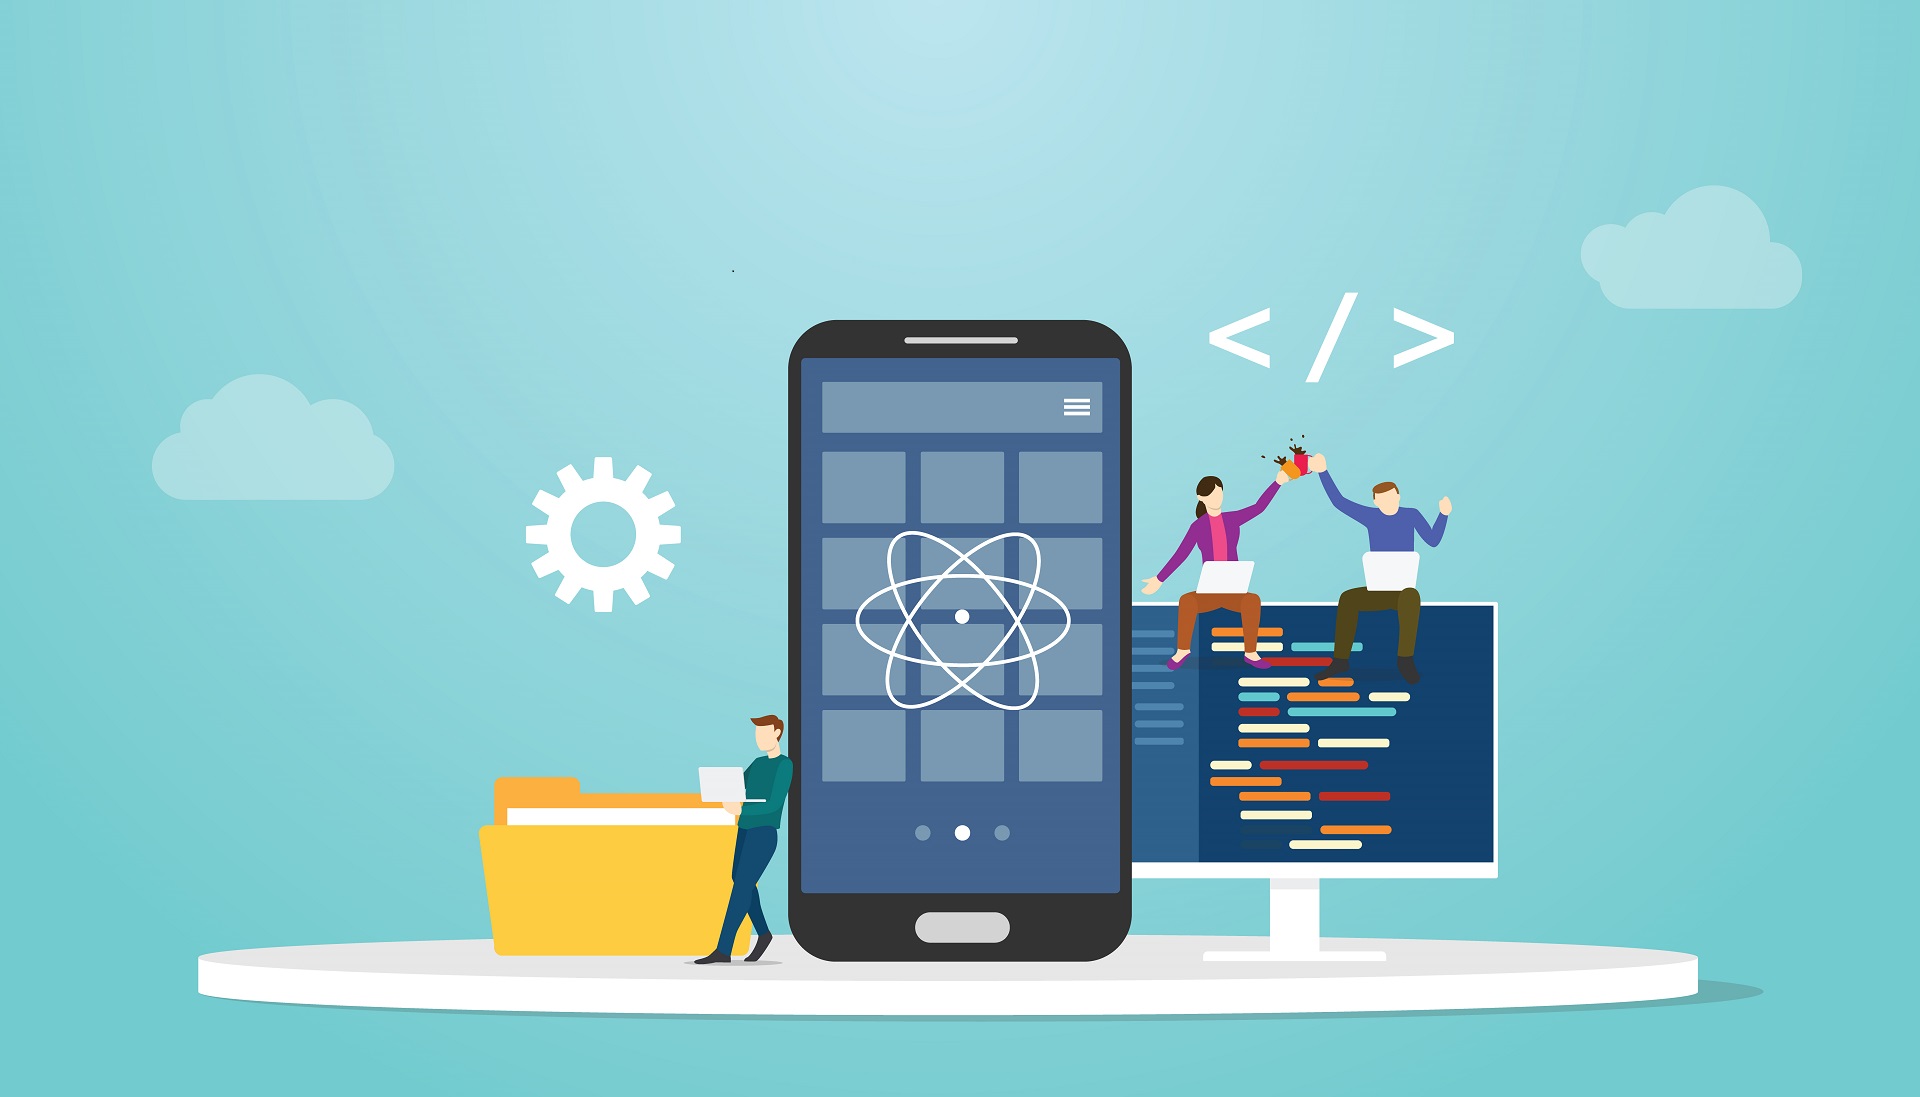 react native mobile apps development concept with modern flat style